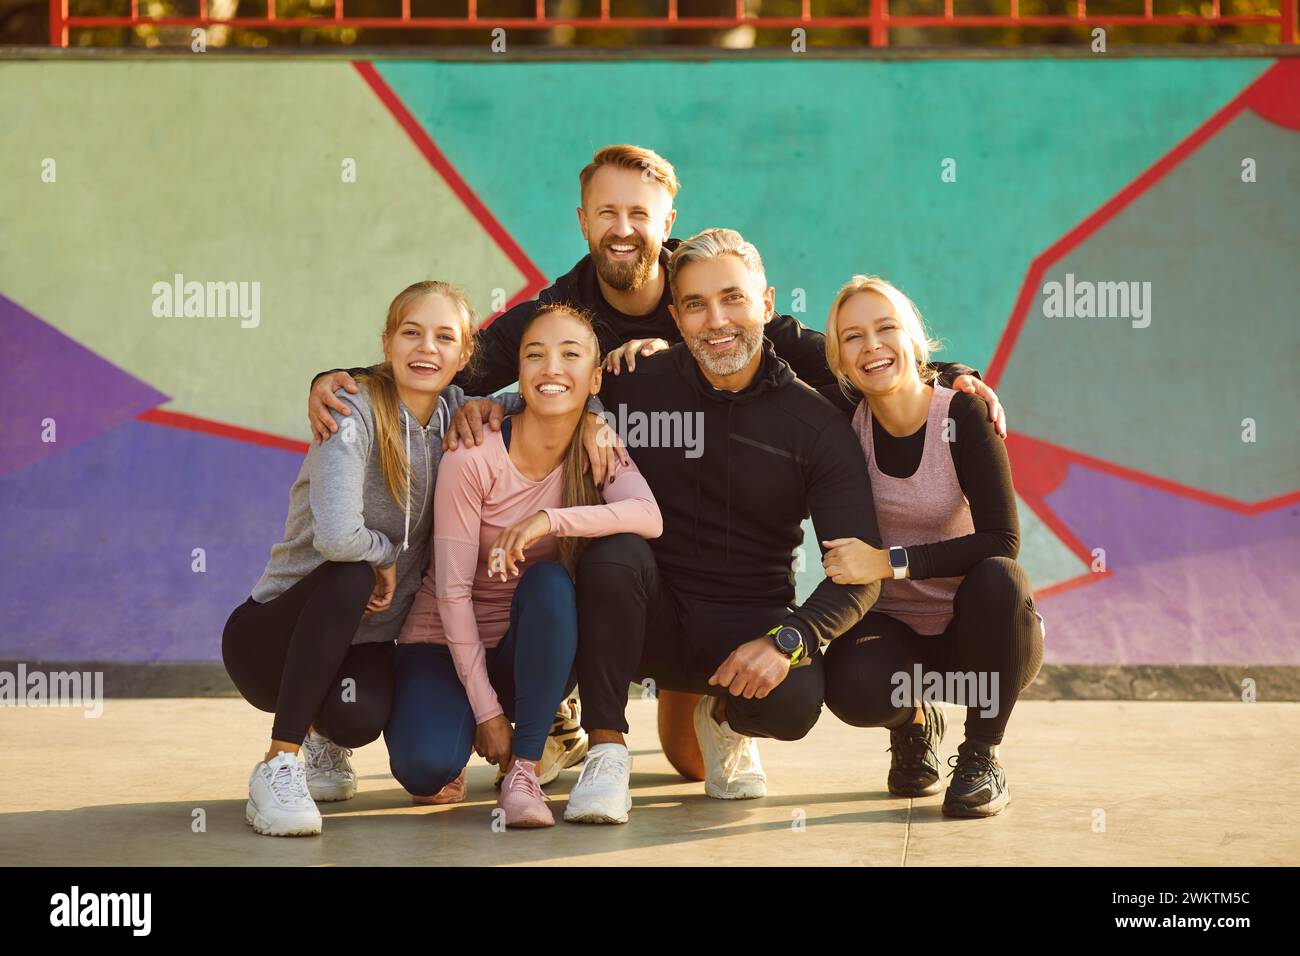 Group of happy smiling people in sportswear looking at camera after sport workout outdoors. Stock Photo